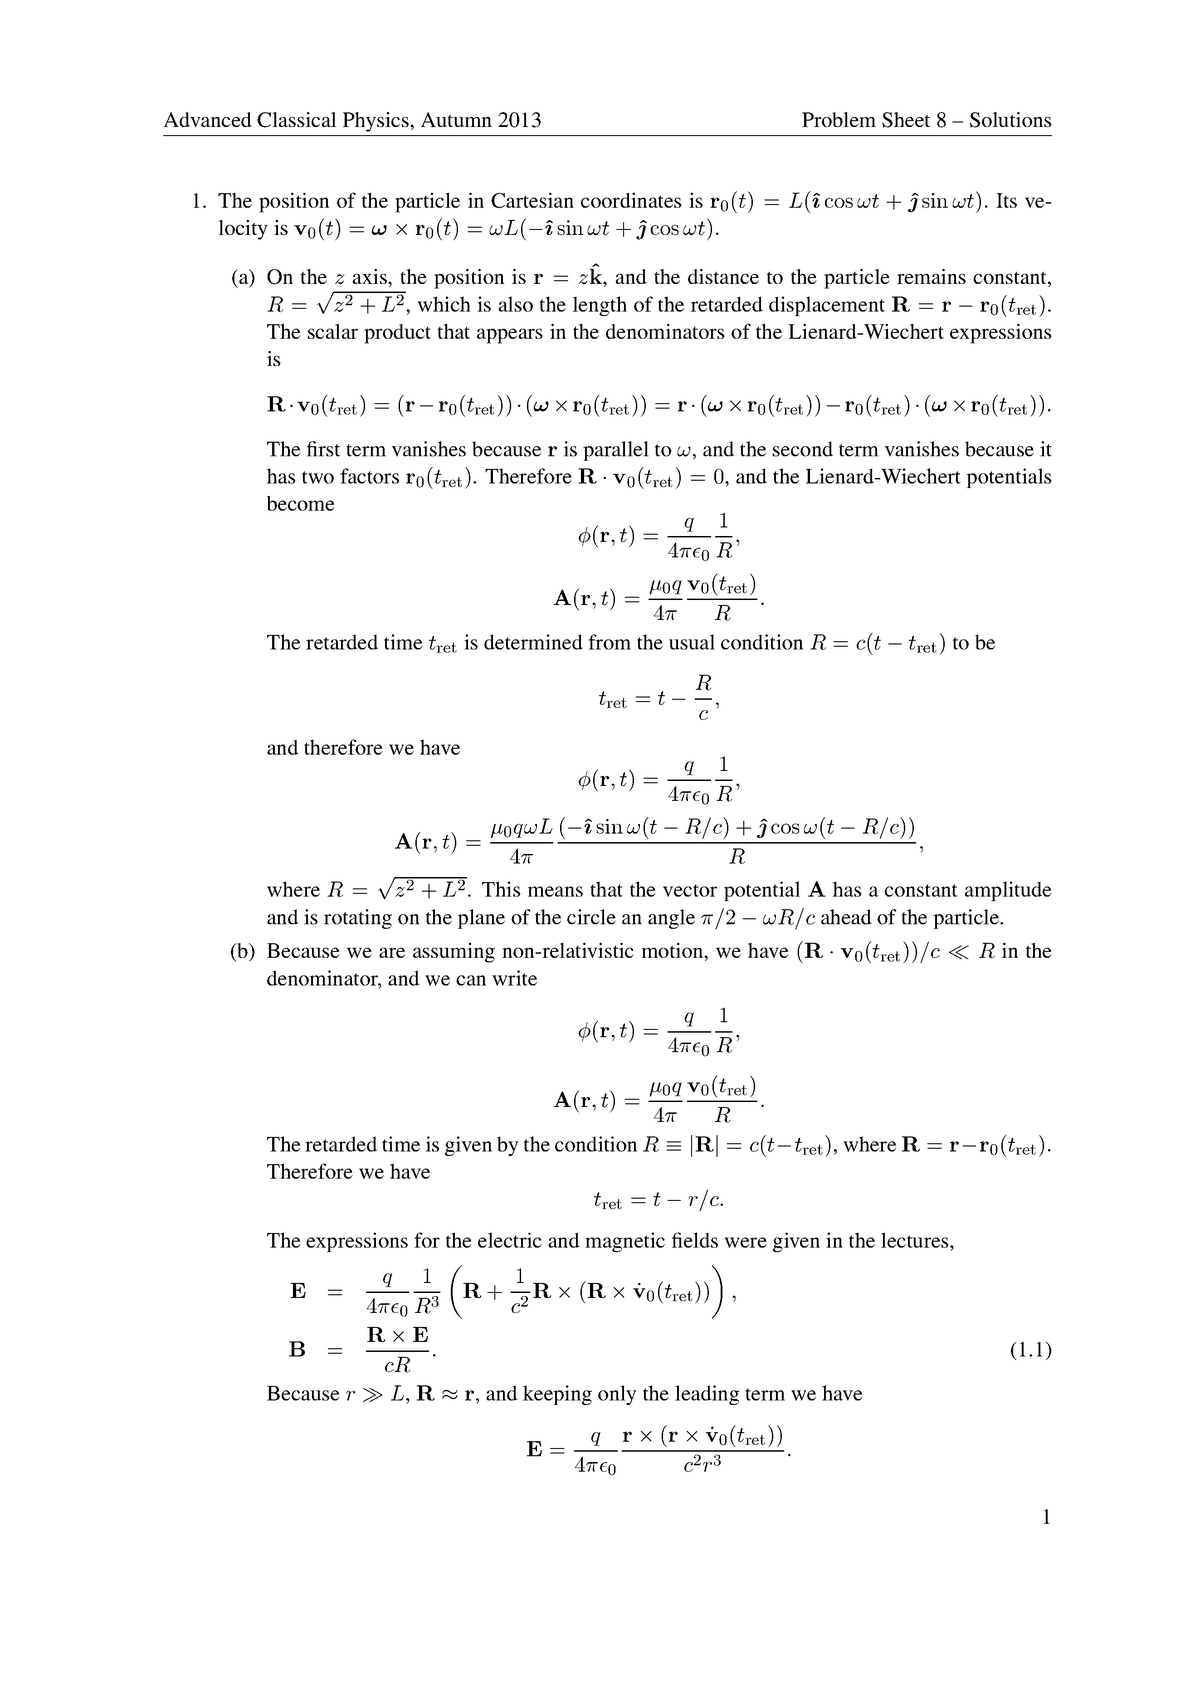 general methods for solving physics problems pdf